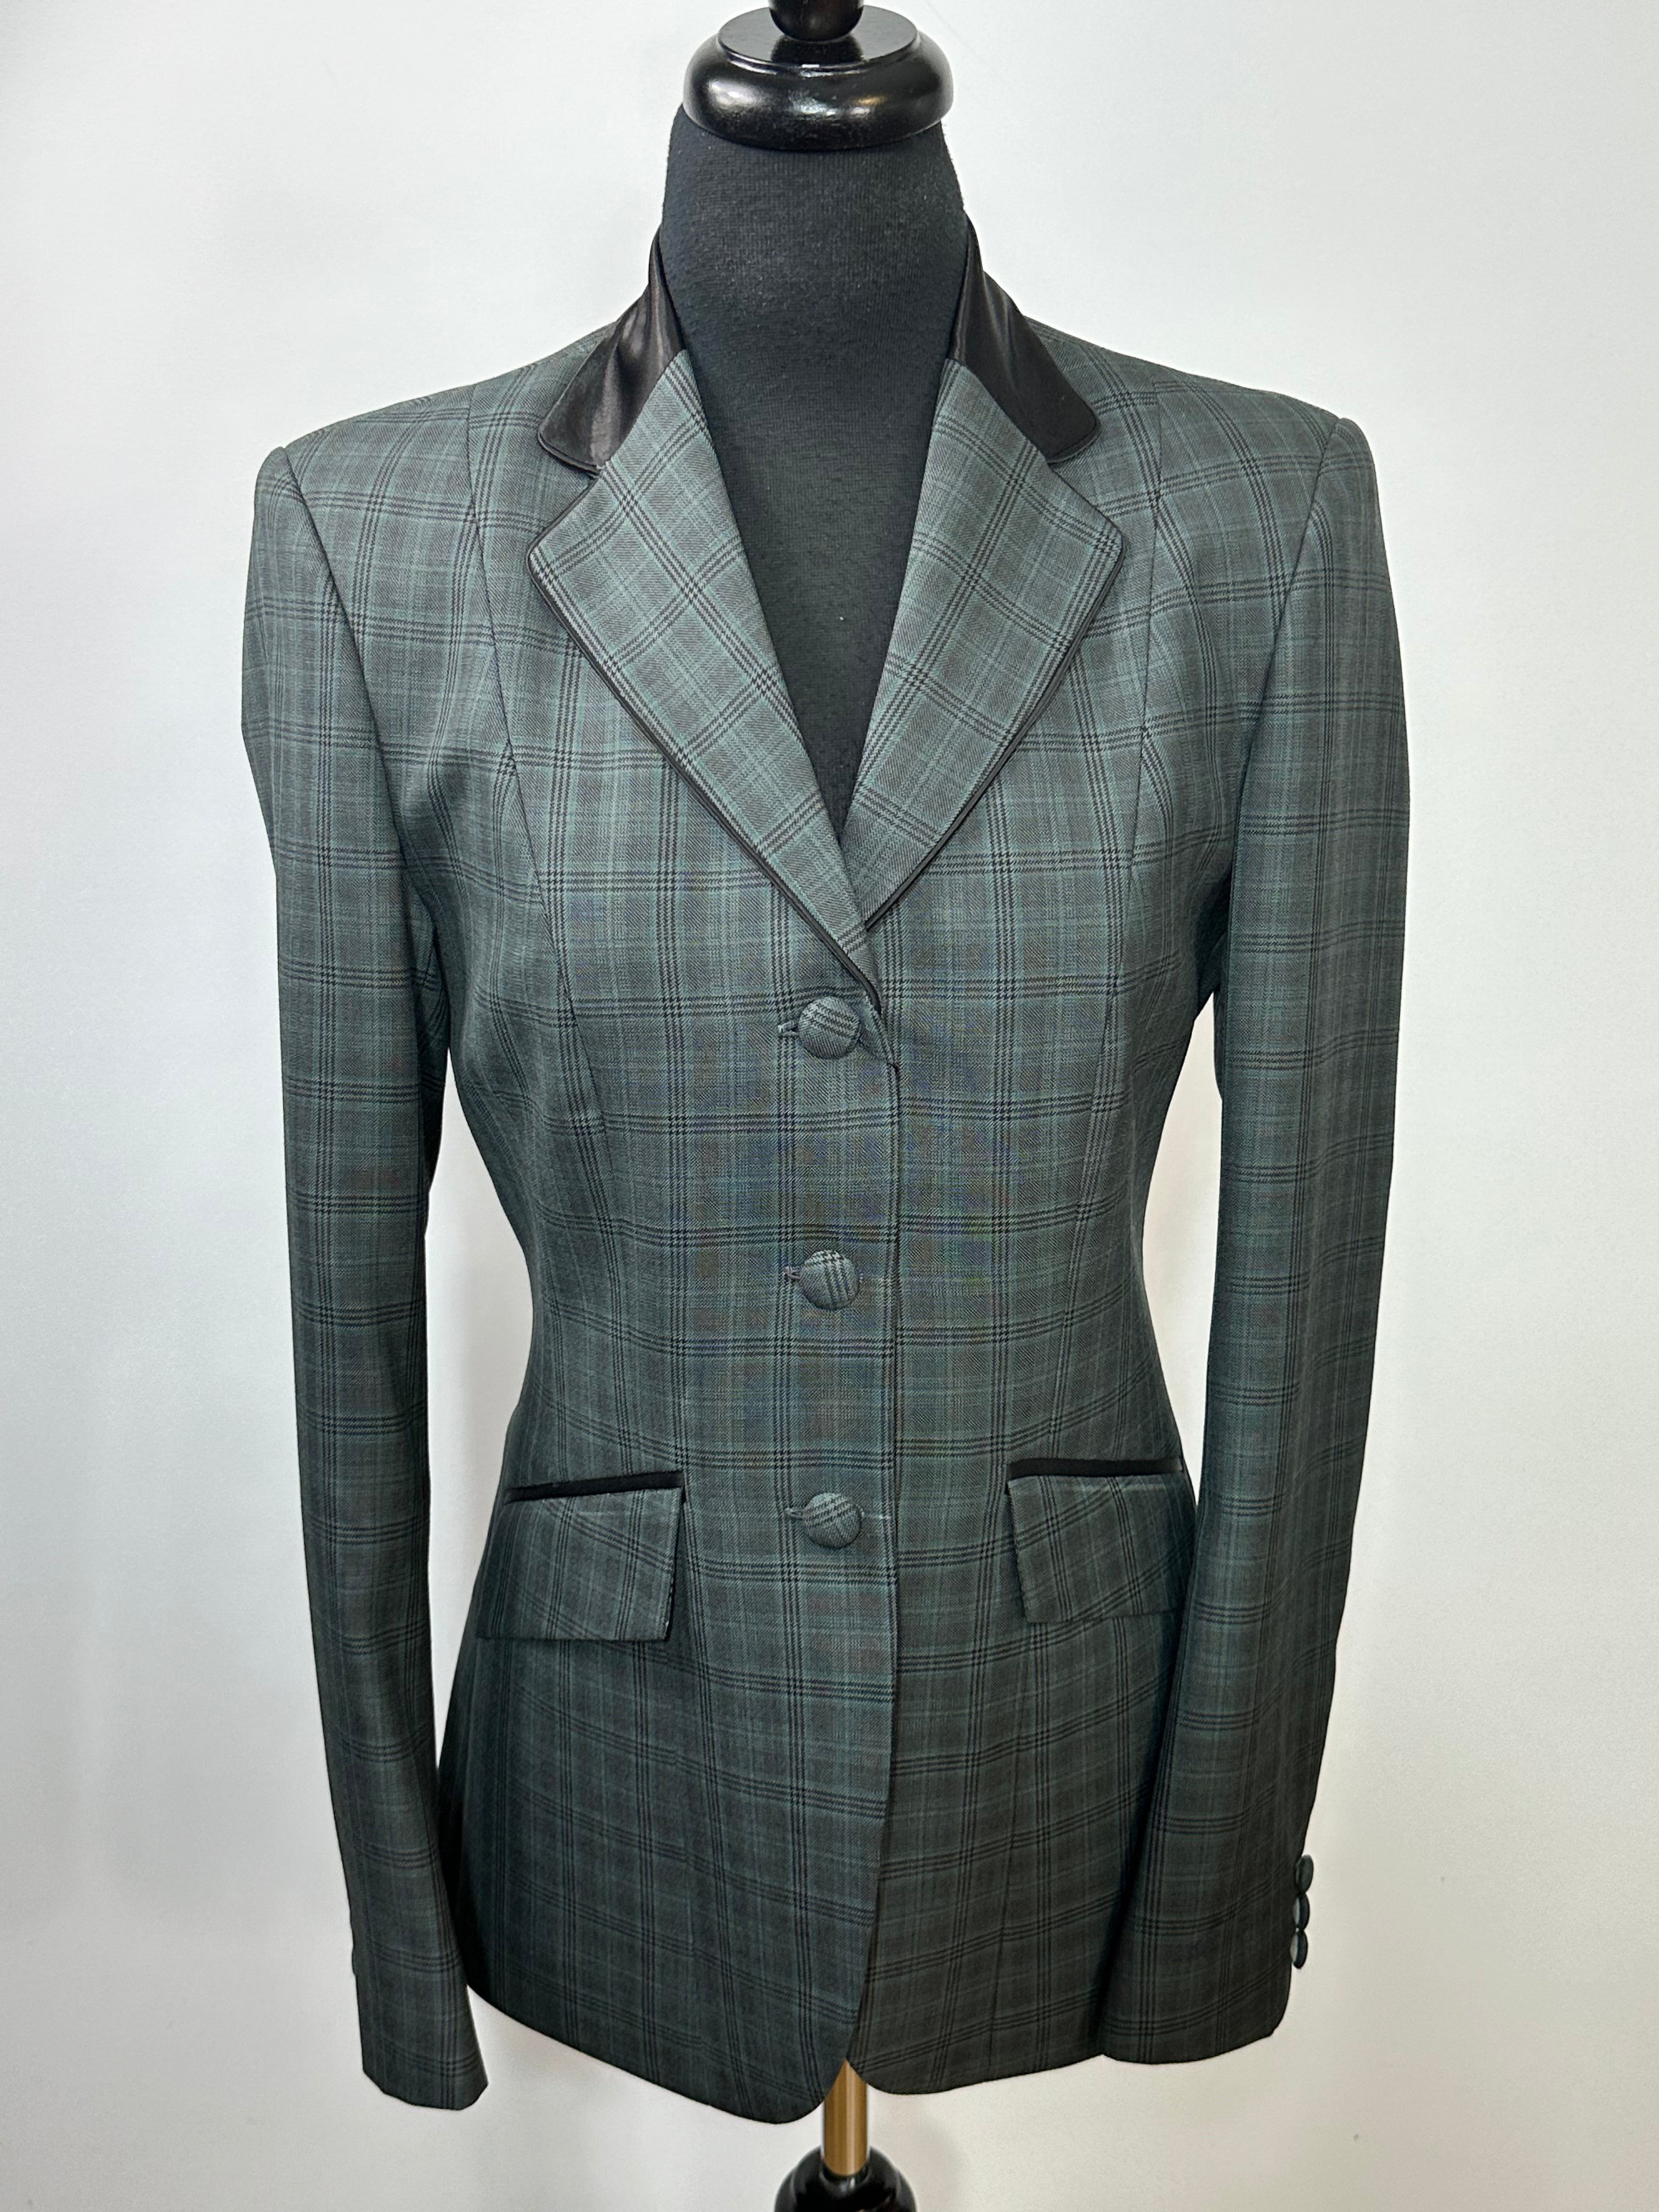 English Show Coat Green and Black Plaid RD26731-120